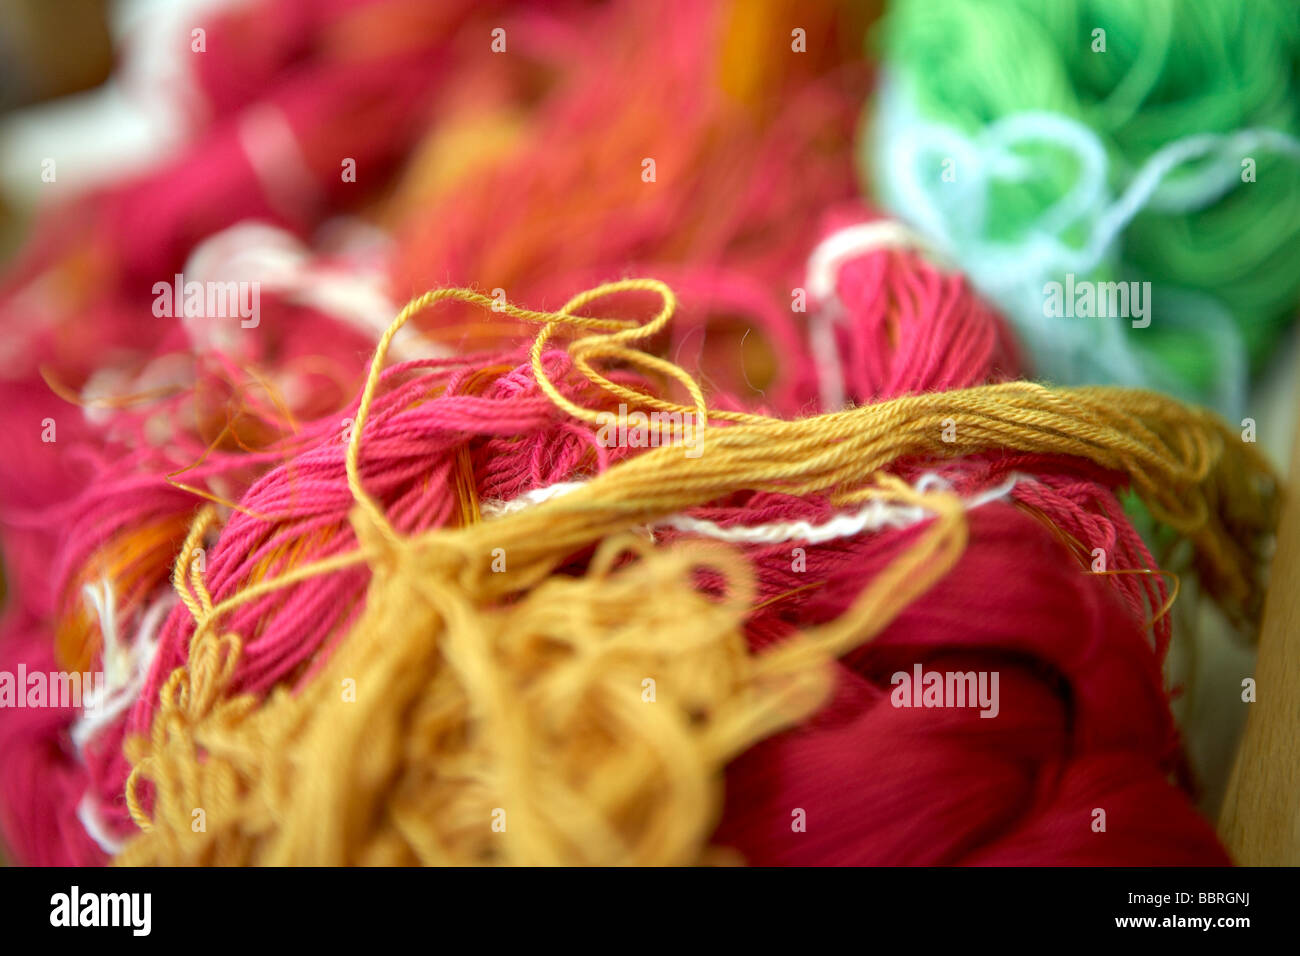 CLOSE UP OF BUNDLES OF WOOL TWINE STRING Stock Photo